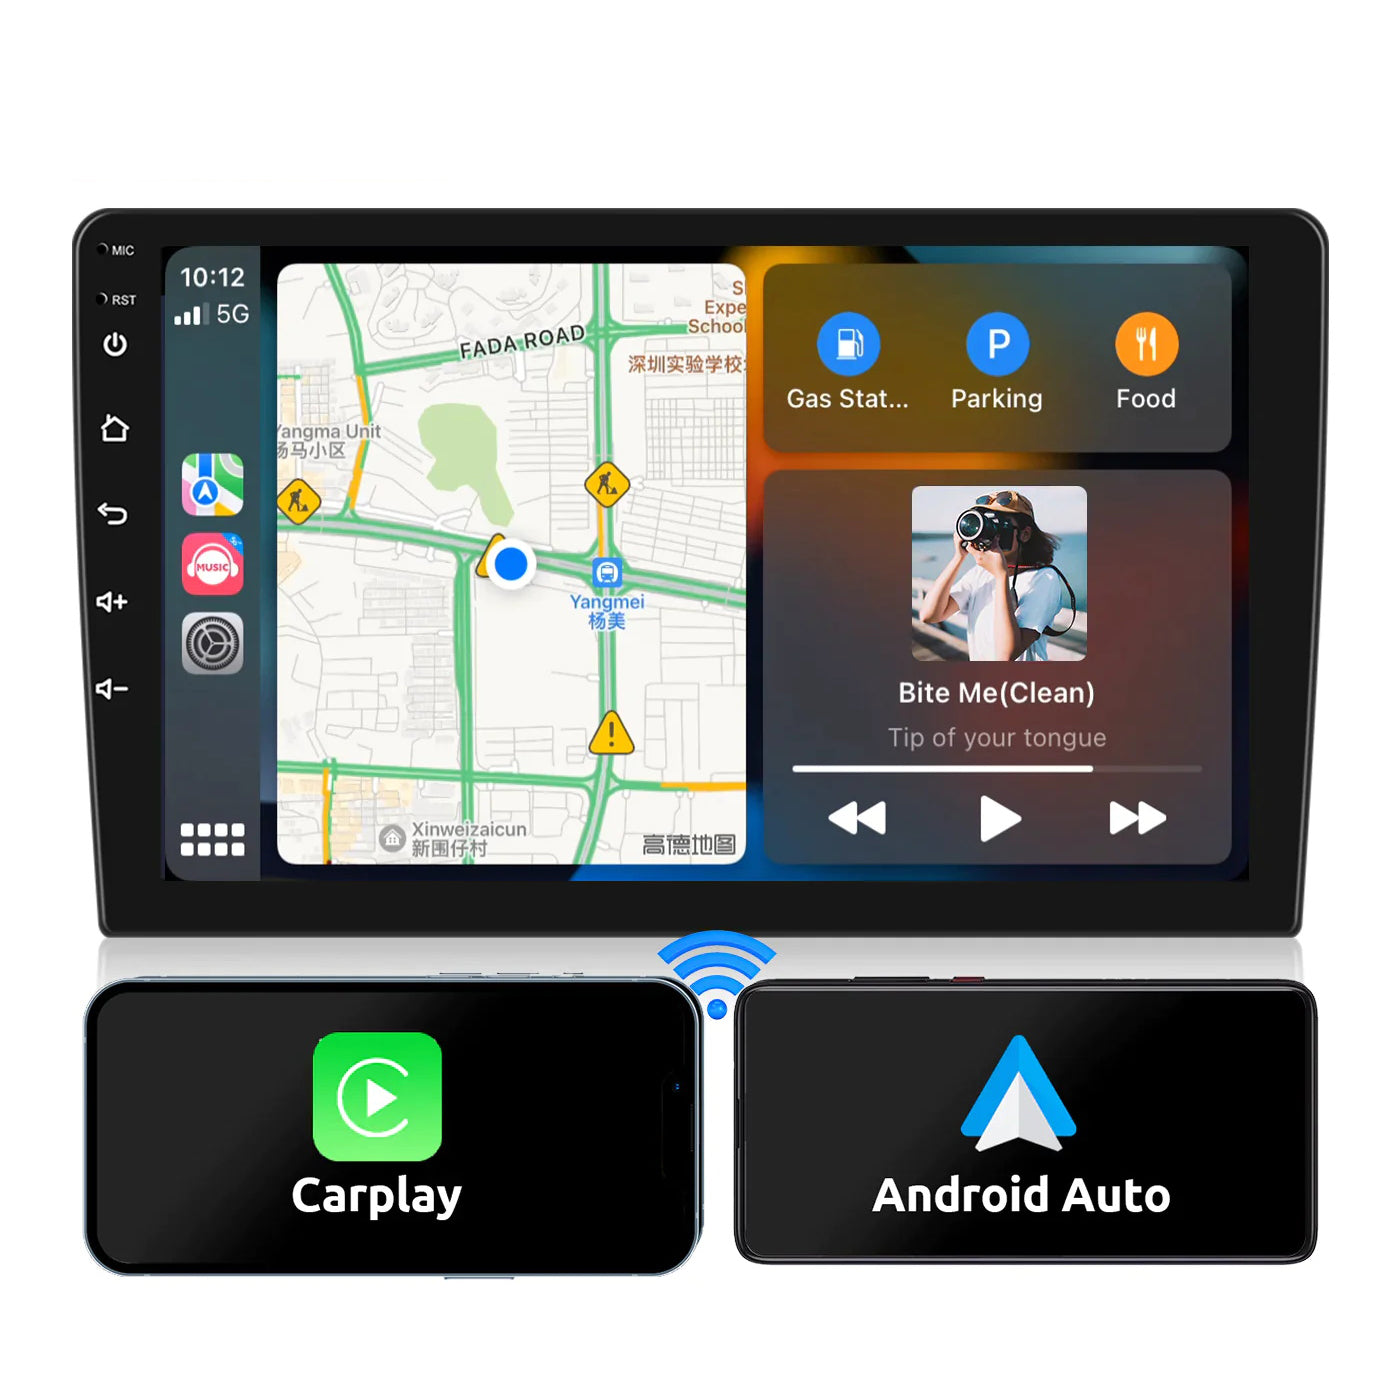 Roinvou 2 32G Android Double Din Car Stereo for Mitsubishi Pajero 2006-2020 9'' 1080P HD Touchscreen Carplay Android Auto Support GPS WiFi Bluetooth H